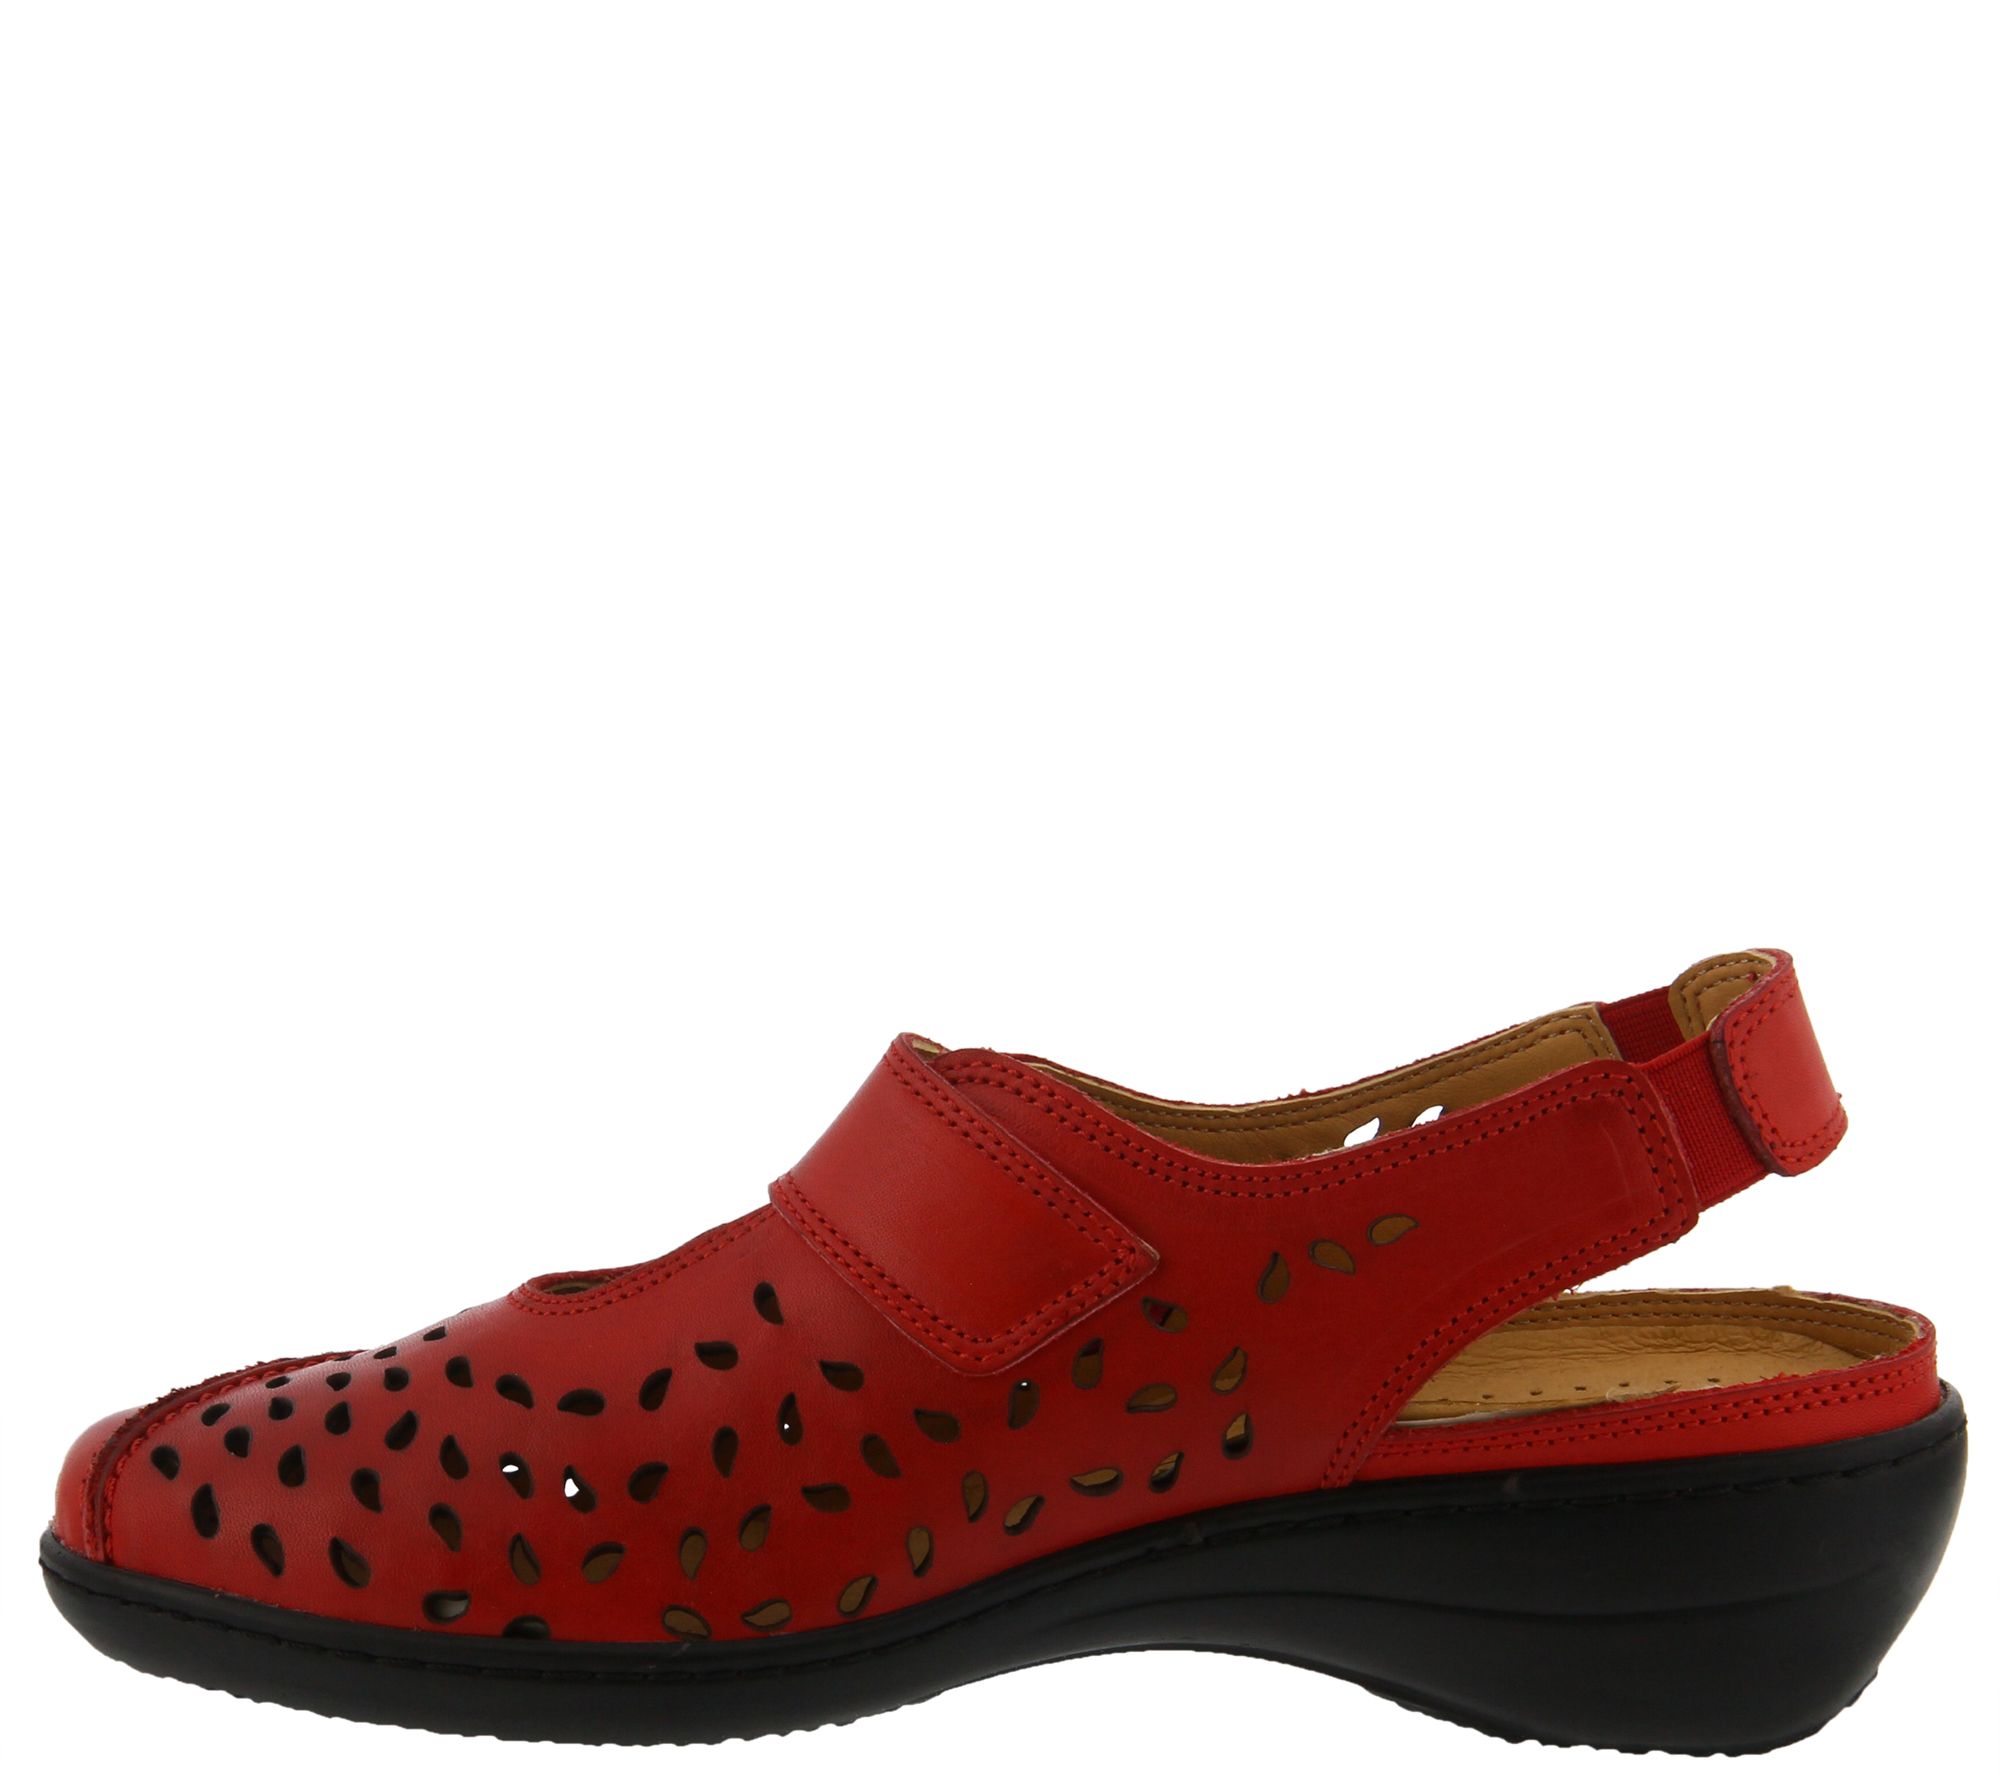 Spring Step Perforated Leather Sling-back Loafers - Fogo - QVC.com